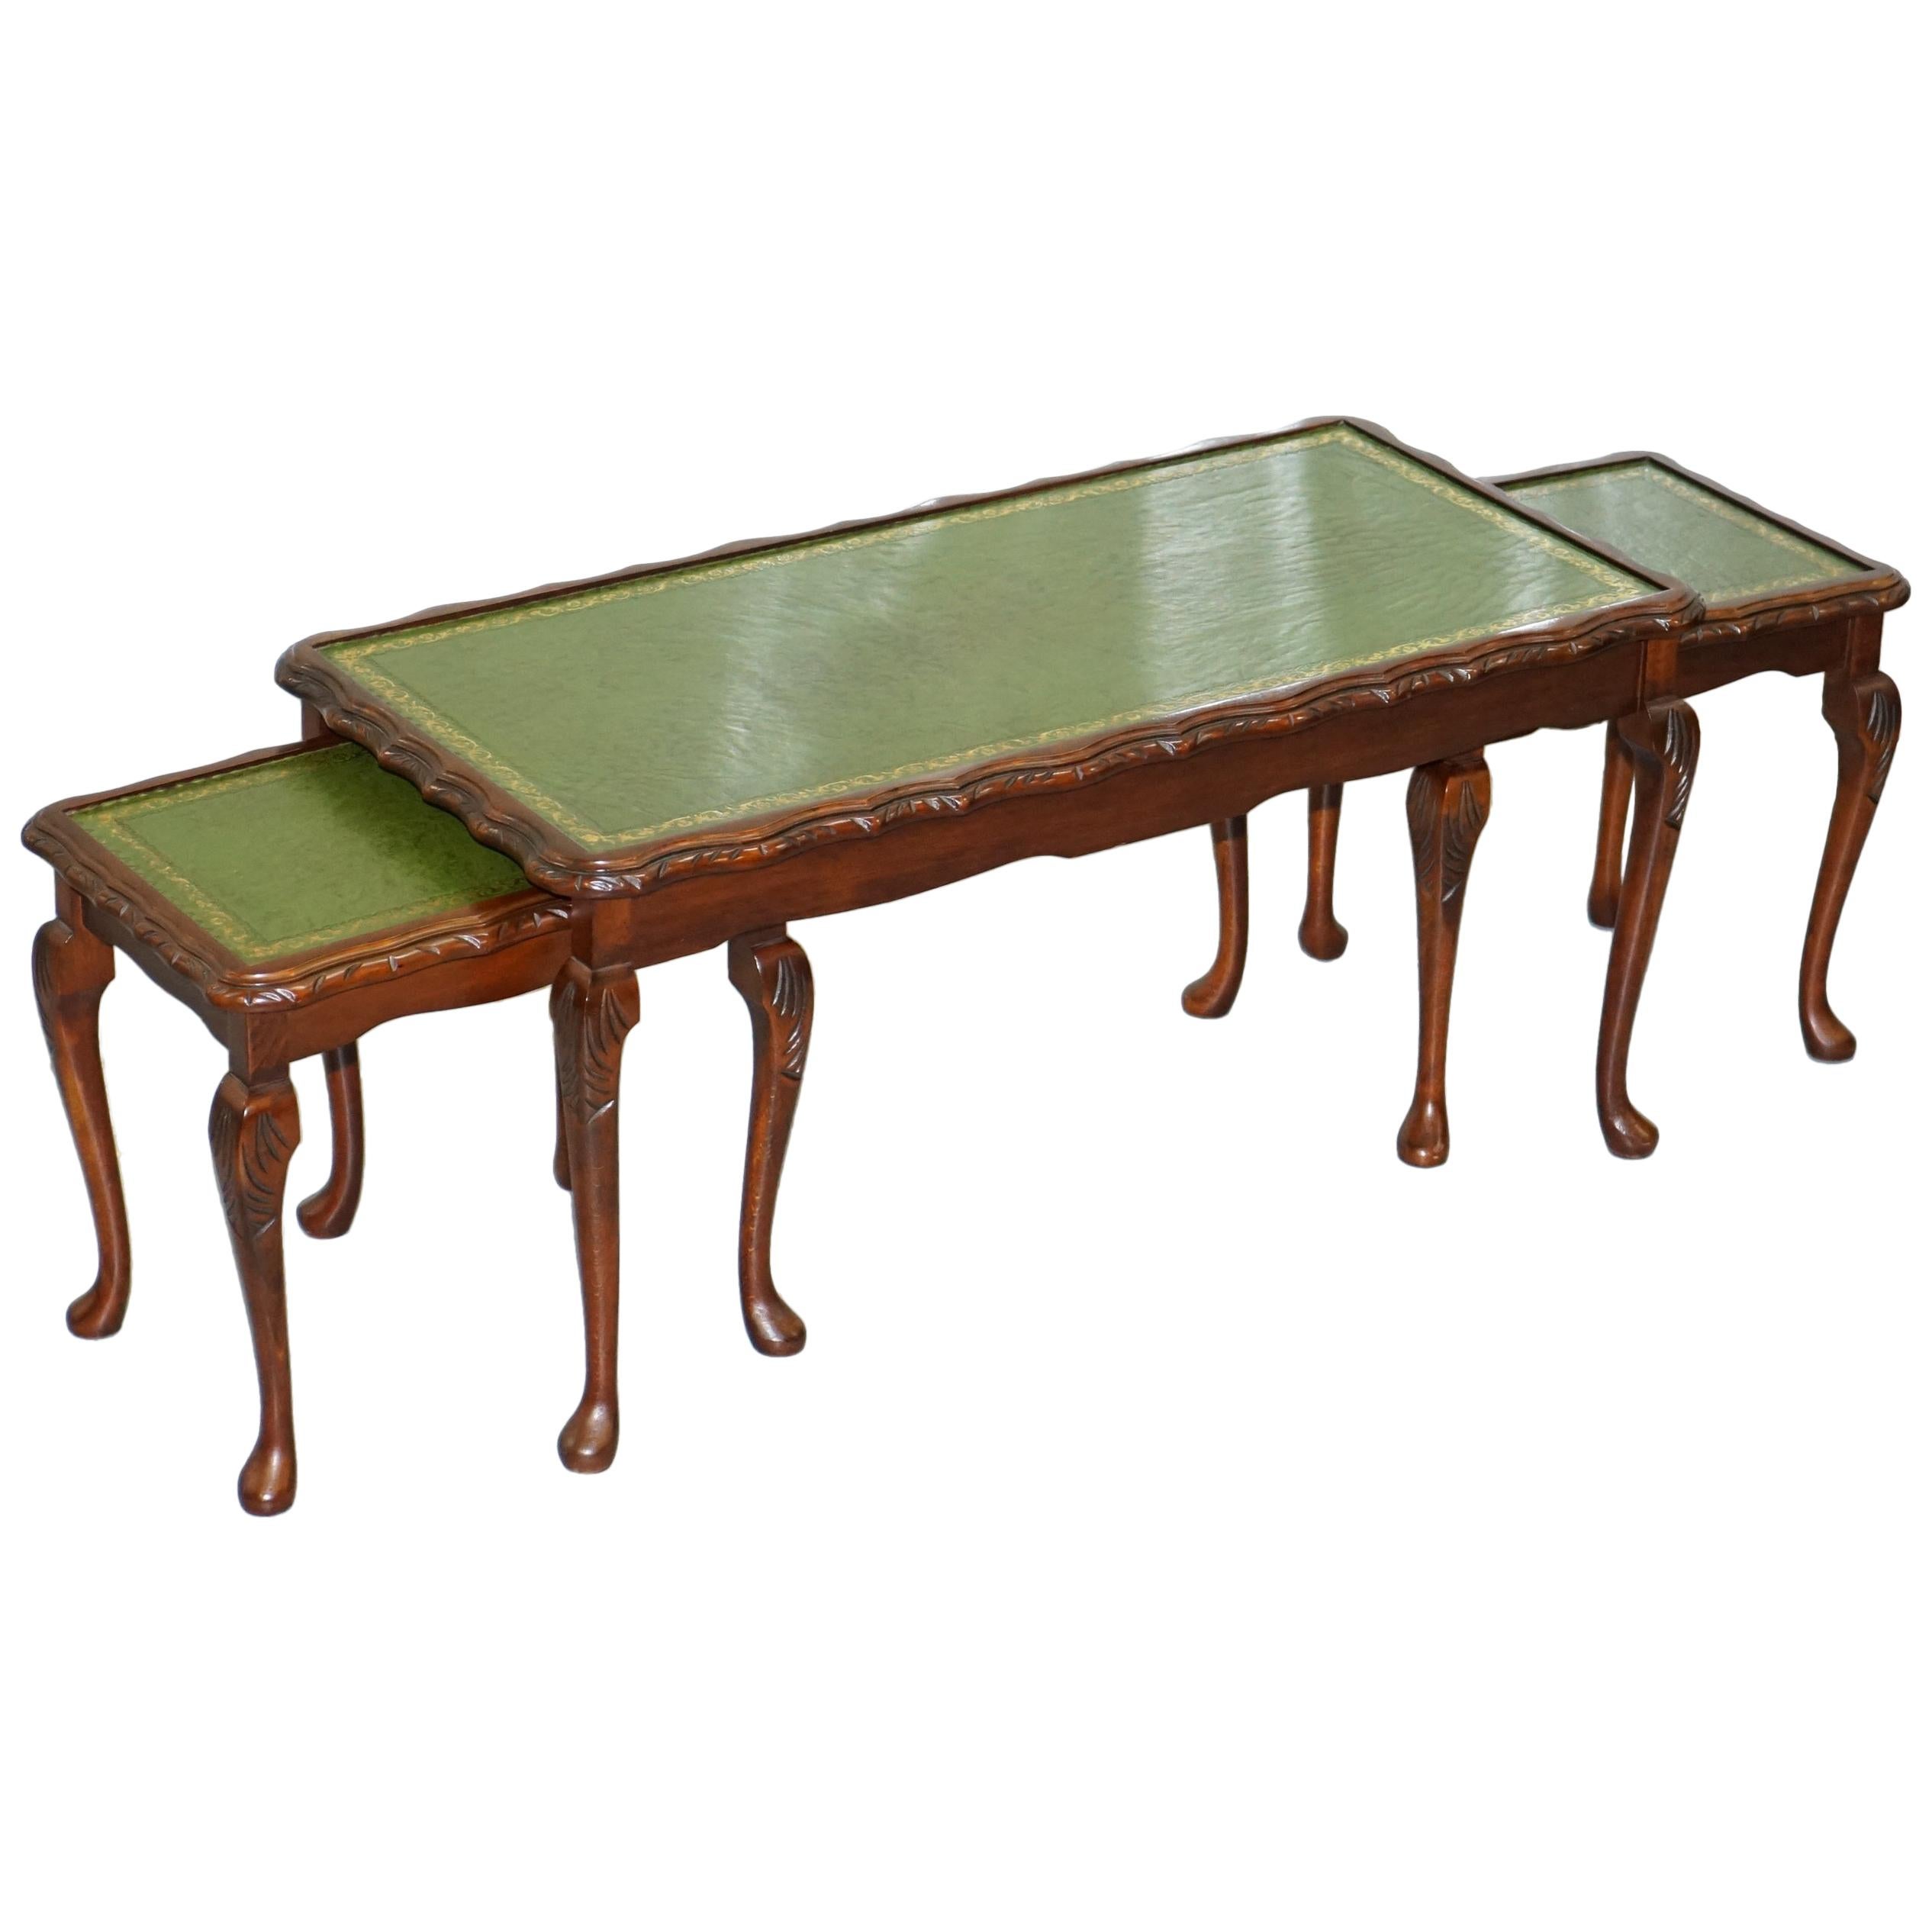 Vintage Mahogany & Green Leather Topped Coffee Table Plus 2 Nest of Small Tables